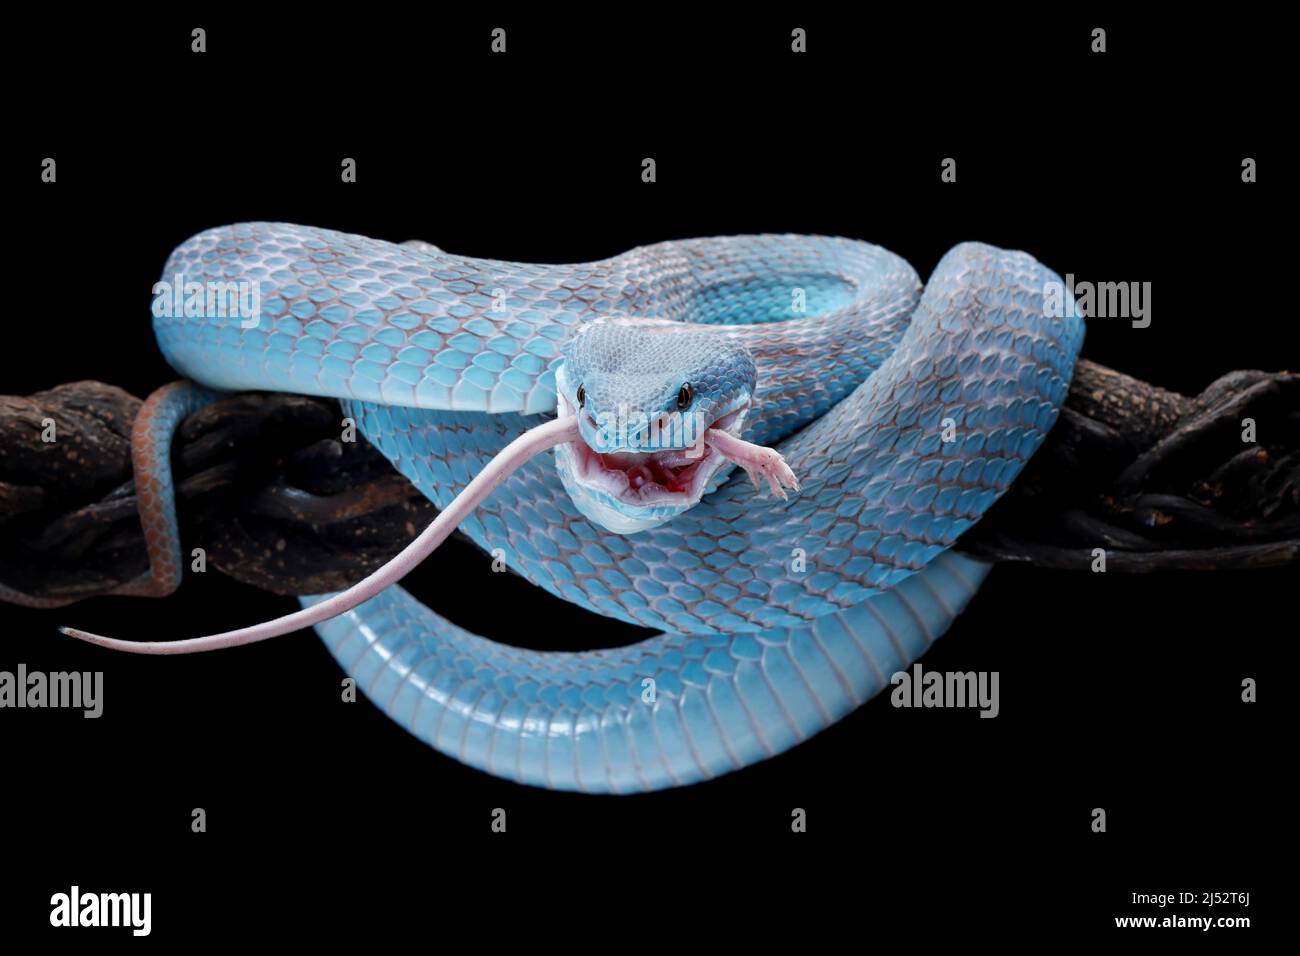 Blue viper snake on branch eating its prey, Indonesia Stock Photo